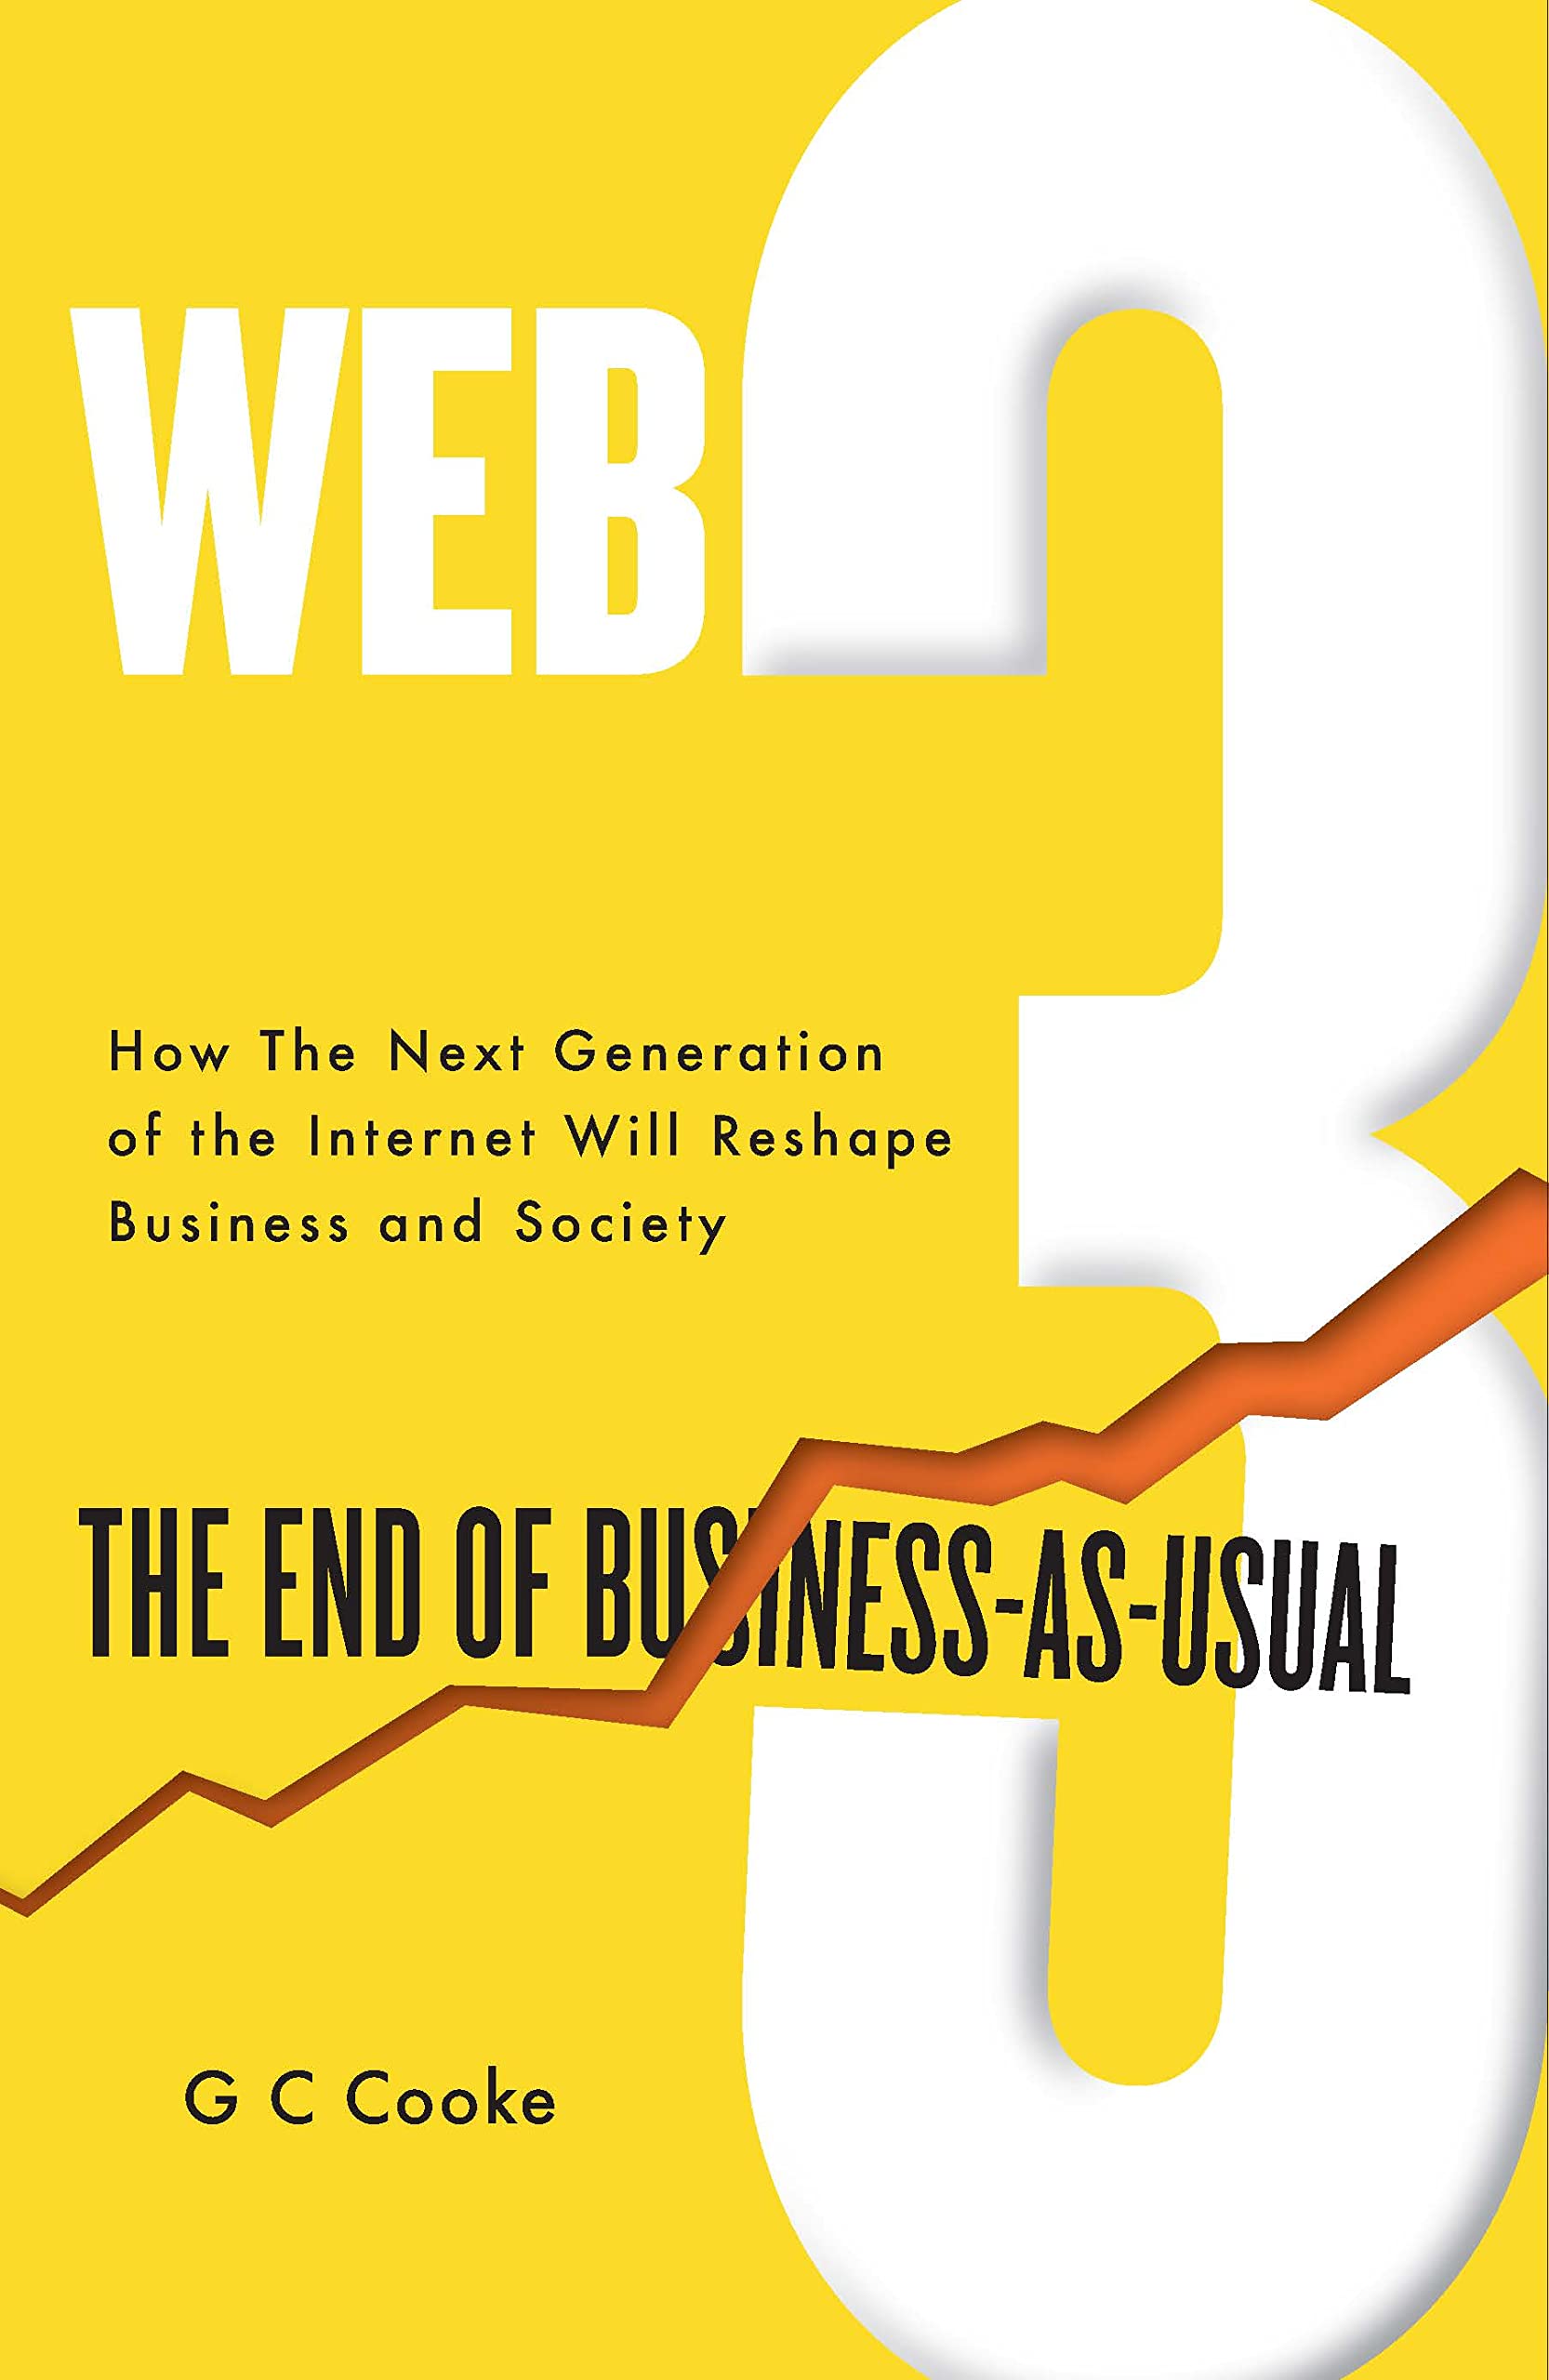 Web3: The End of Business-As-Usual